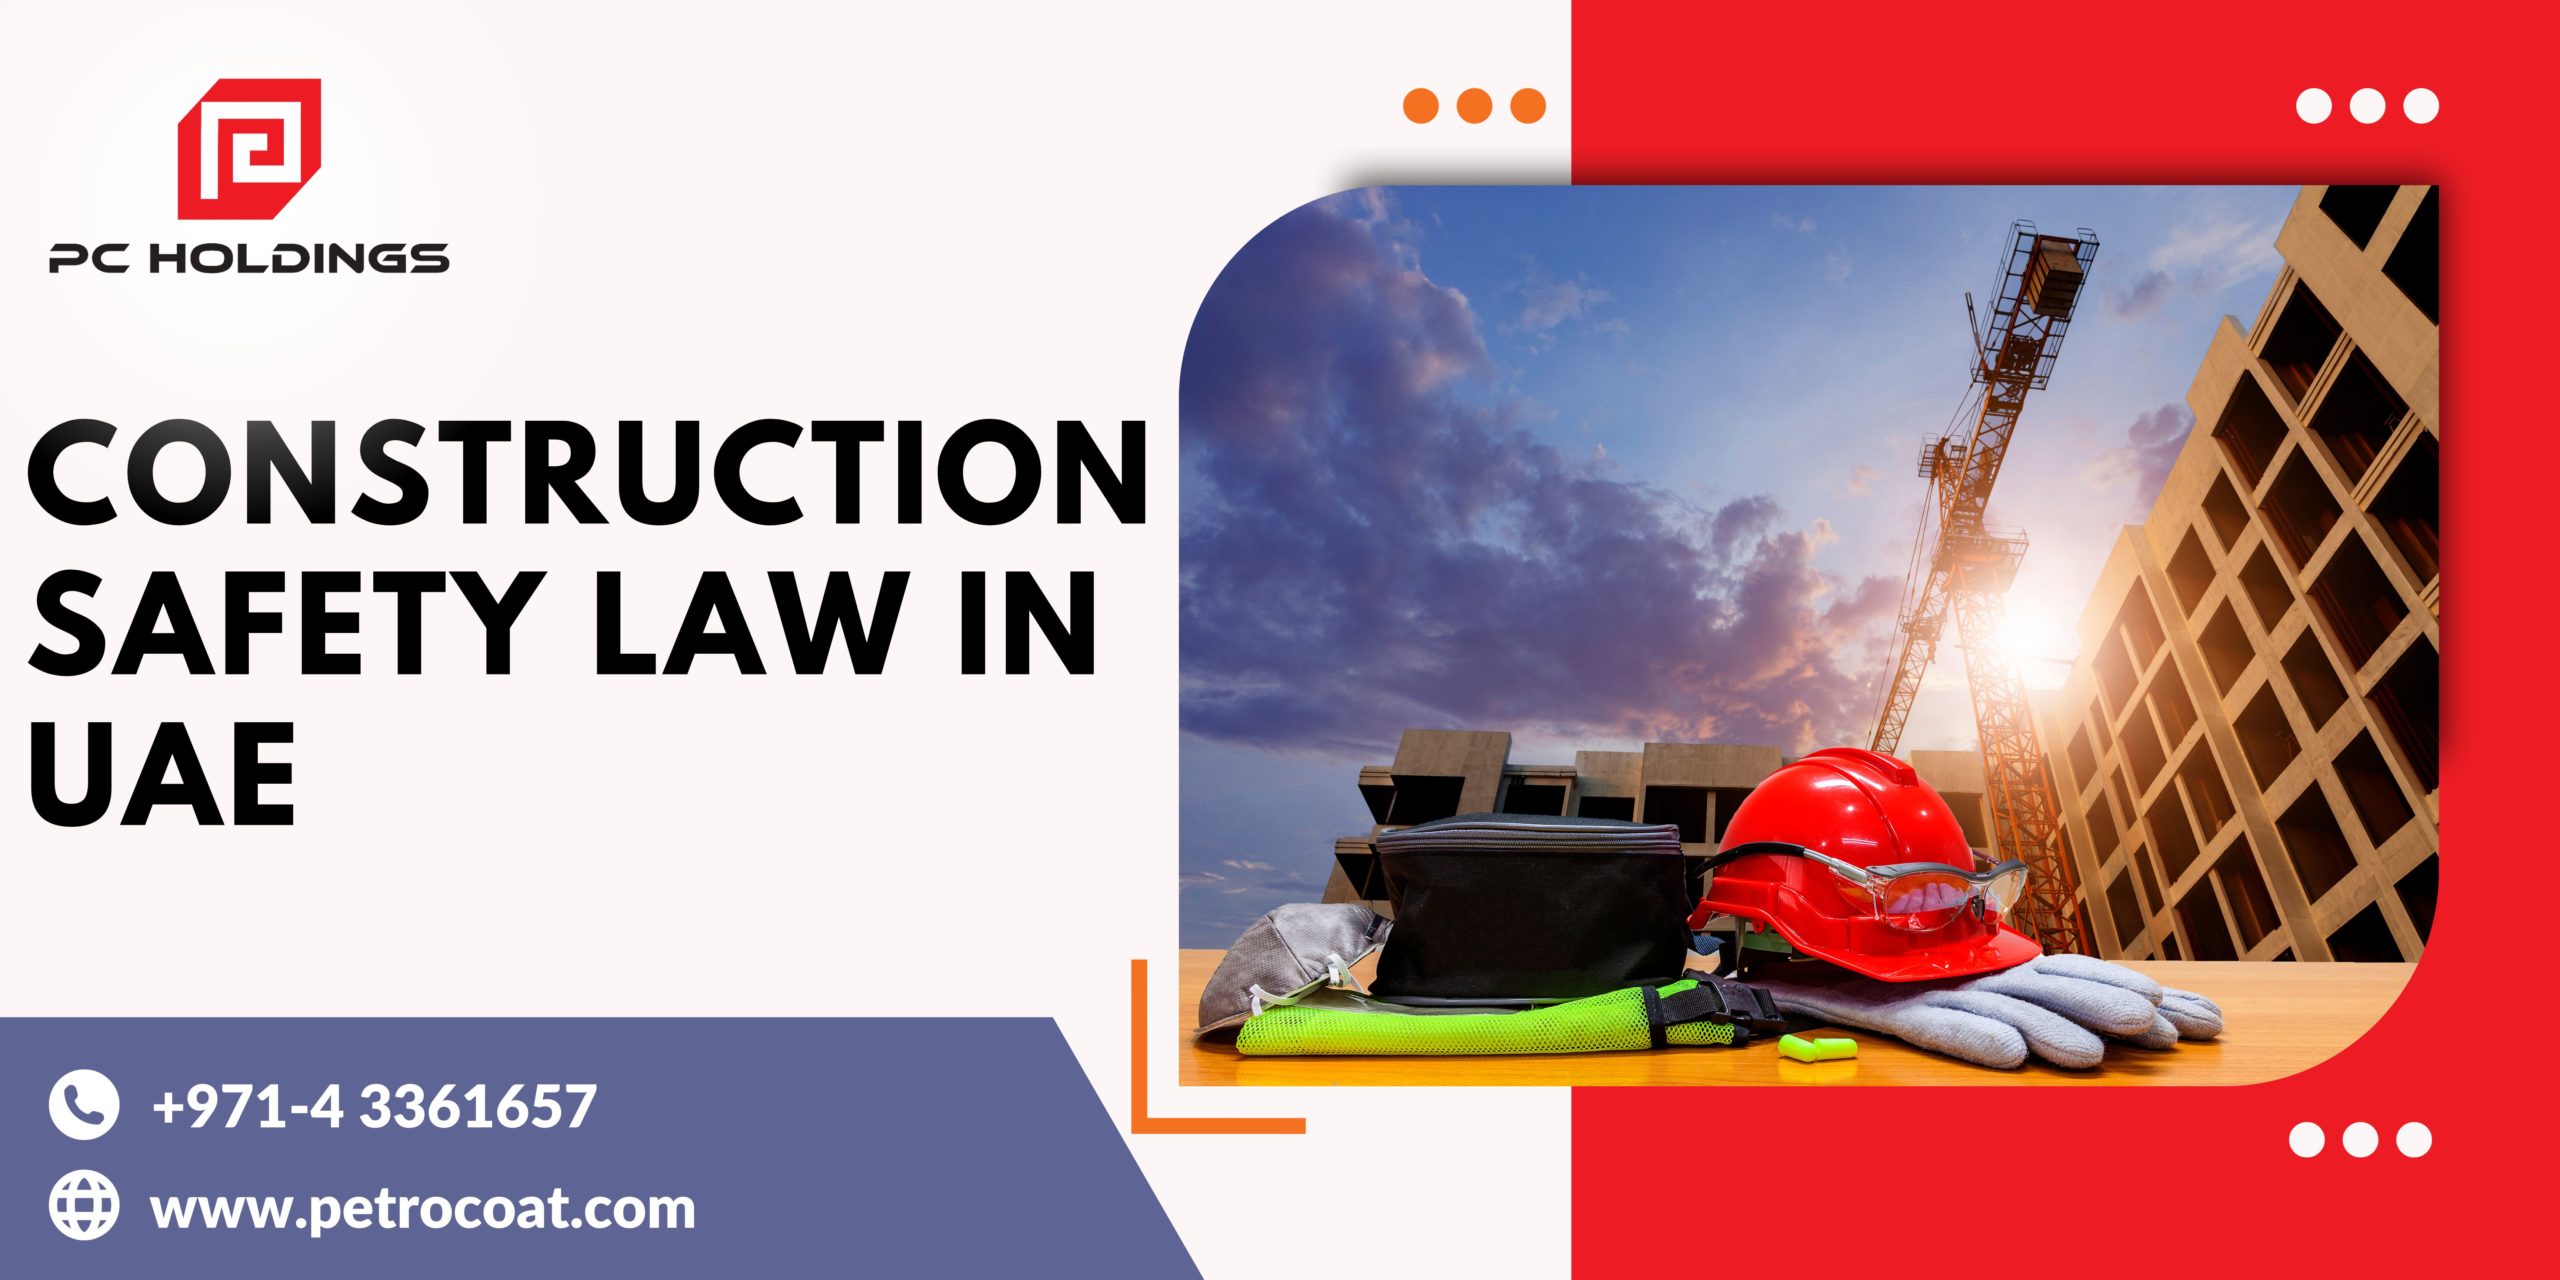 Construction Safety Law in UAE - PC Holdings